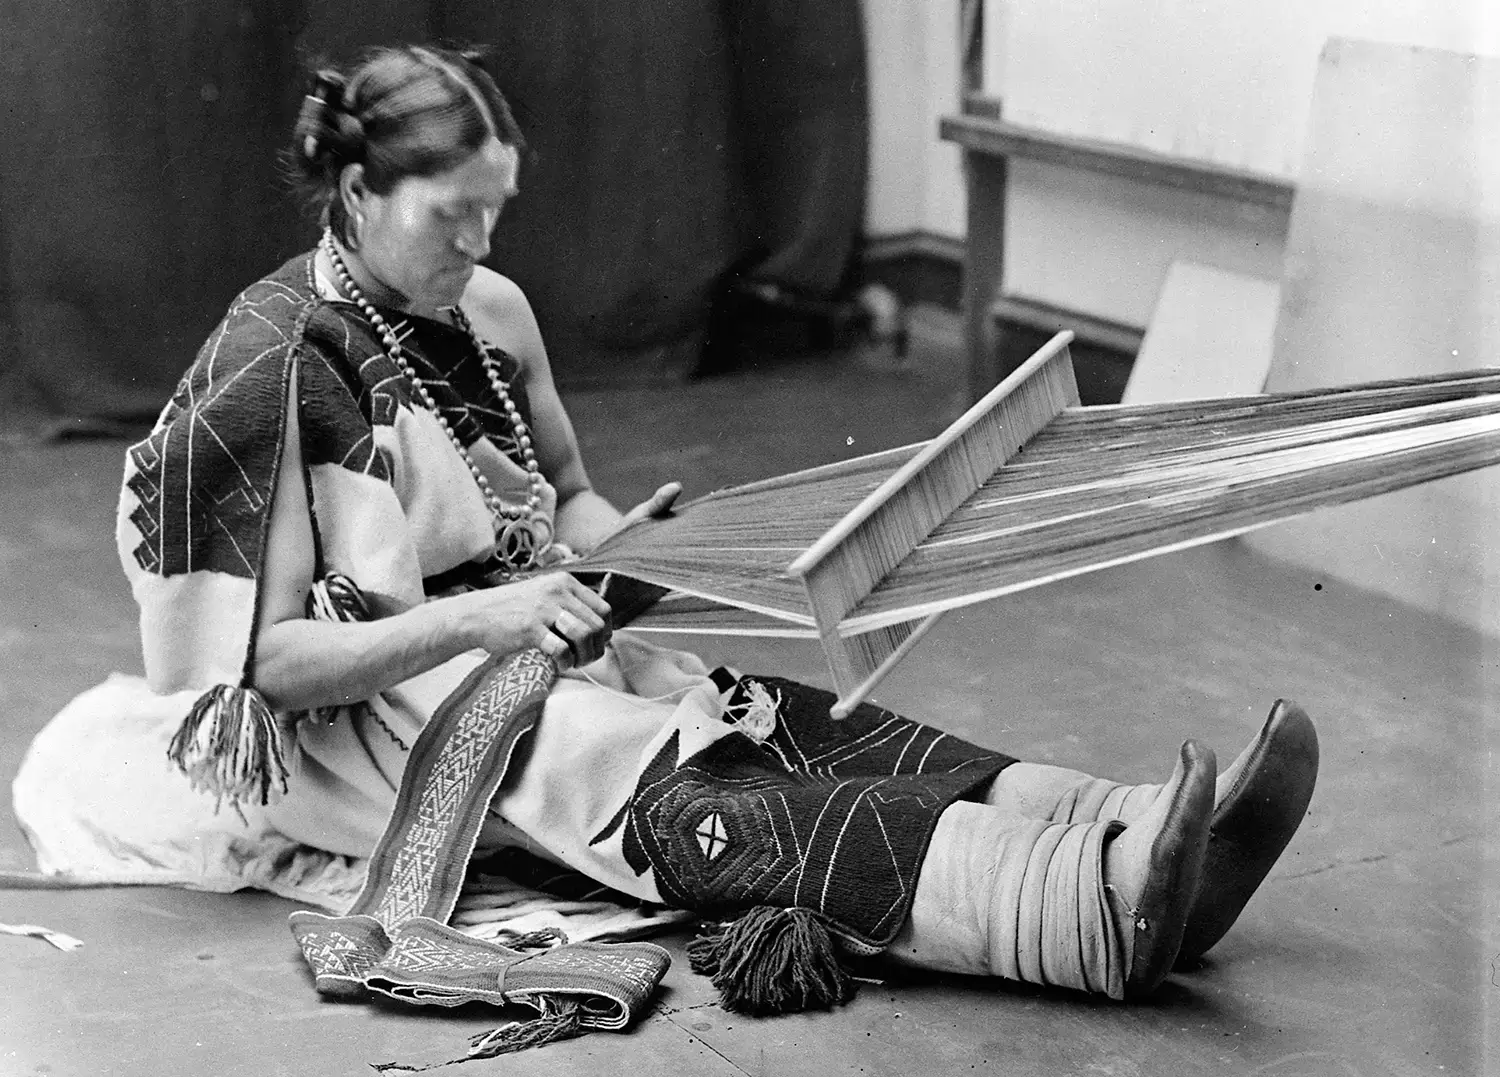 Wewa sits on the floor of the room, clad in traditional Zuni clothes and weaving a textile on a backstrap loom.